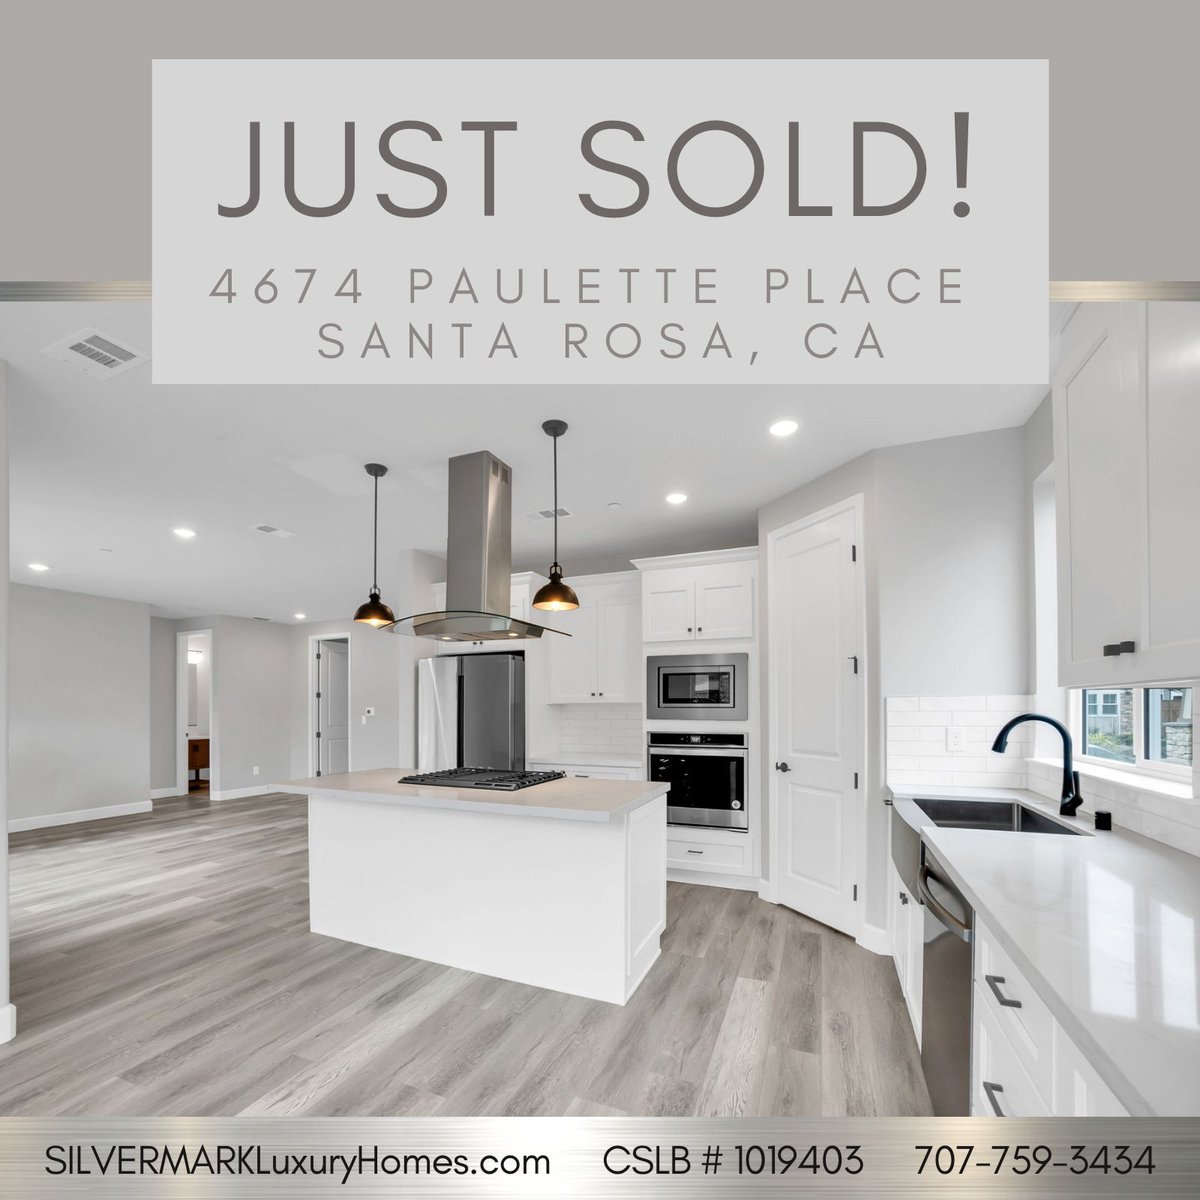 #SOLD!!!
4674 Paulette Place Santa Rosa CA
4 Bedrooms & 3.5 Bathrooms
2,870 SF | 2-story | 3-car garage
BRAND NEW Construction

#justsold #rebuildingSantaRosa #SantaRosaCA #santarosacalifornia #santarosarealestate #markwest #WikiUp #DoneDeal